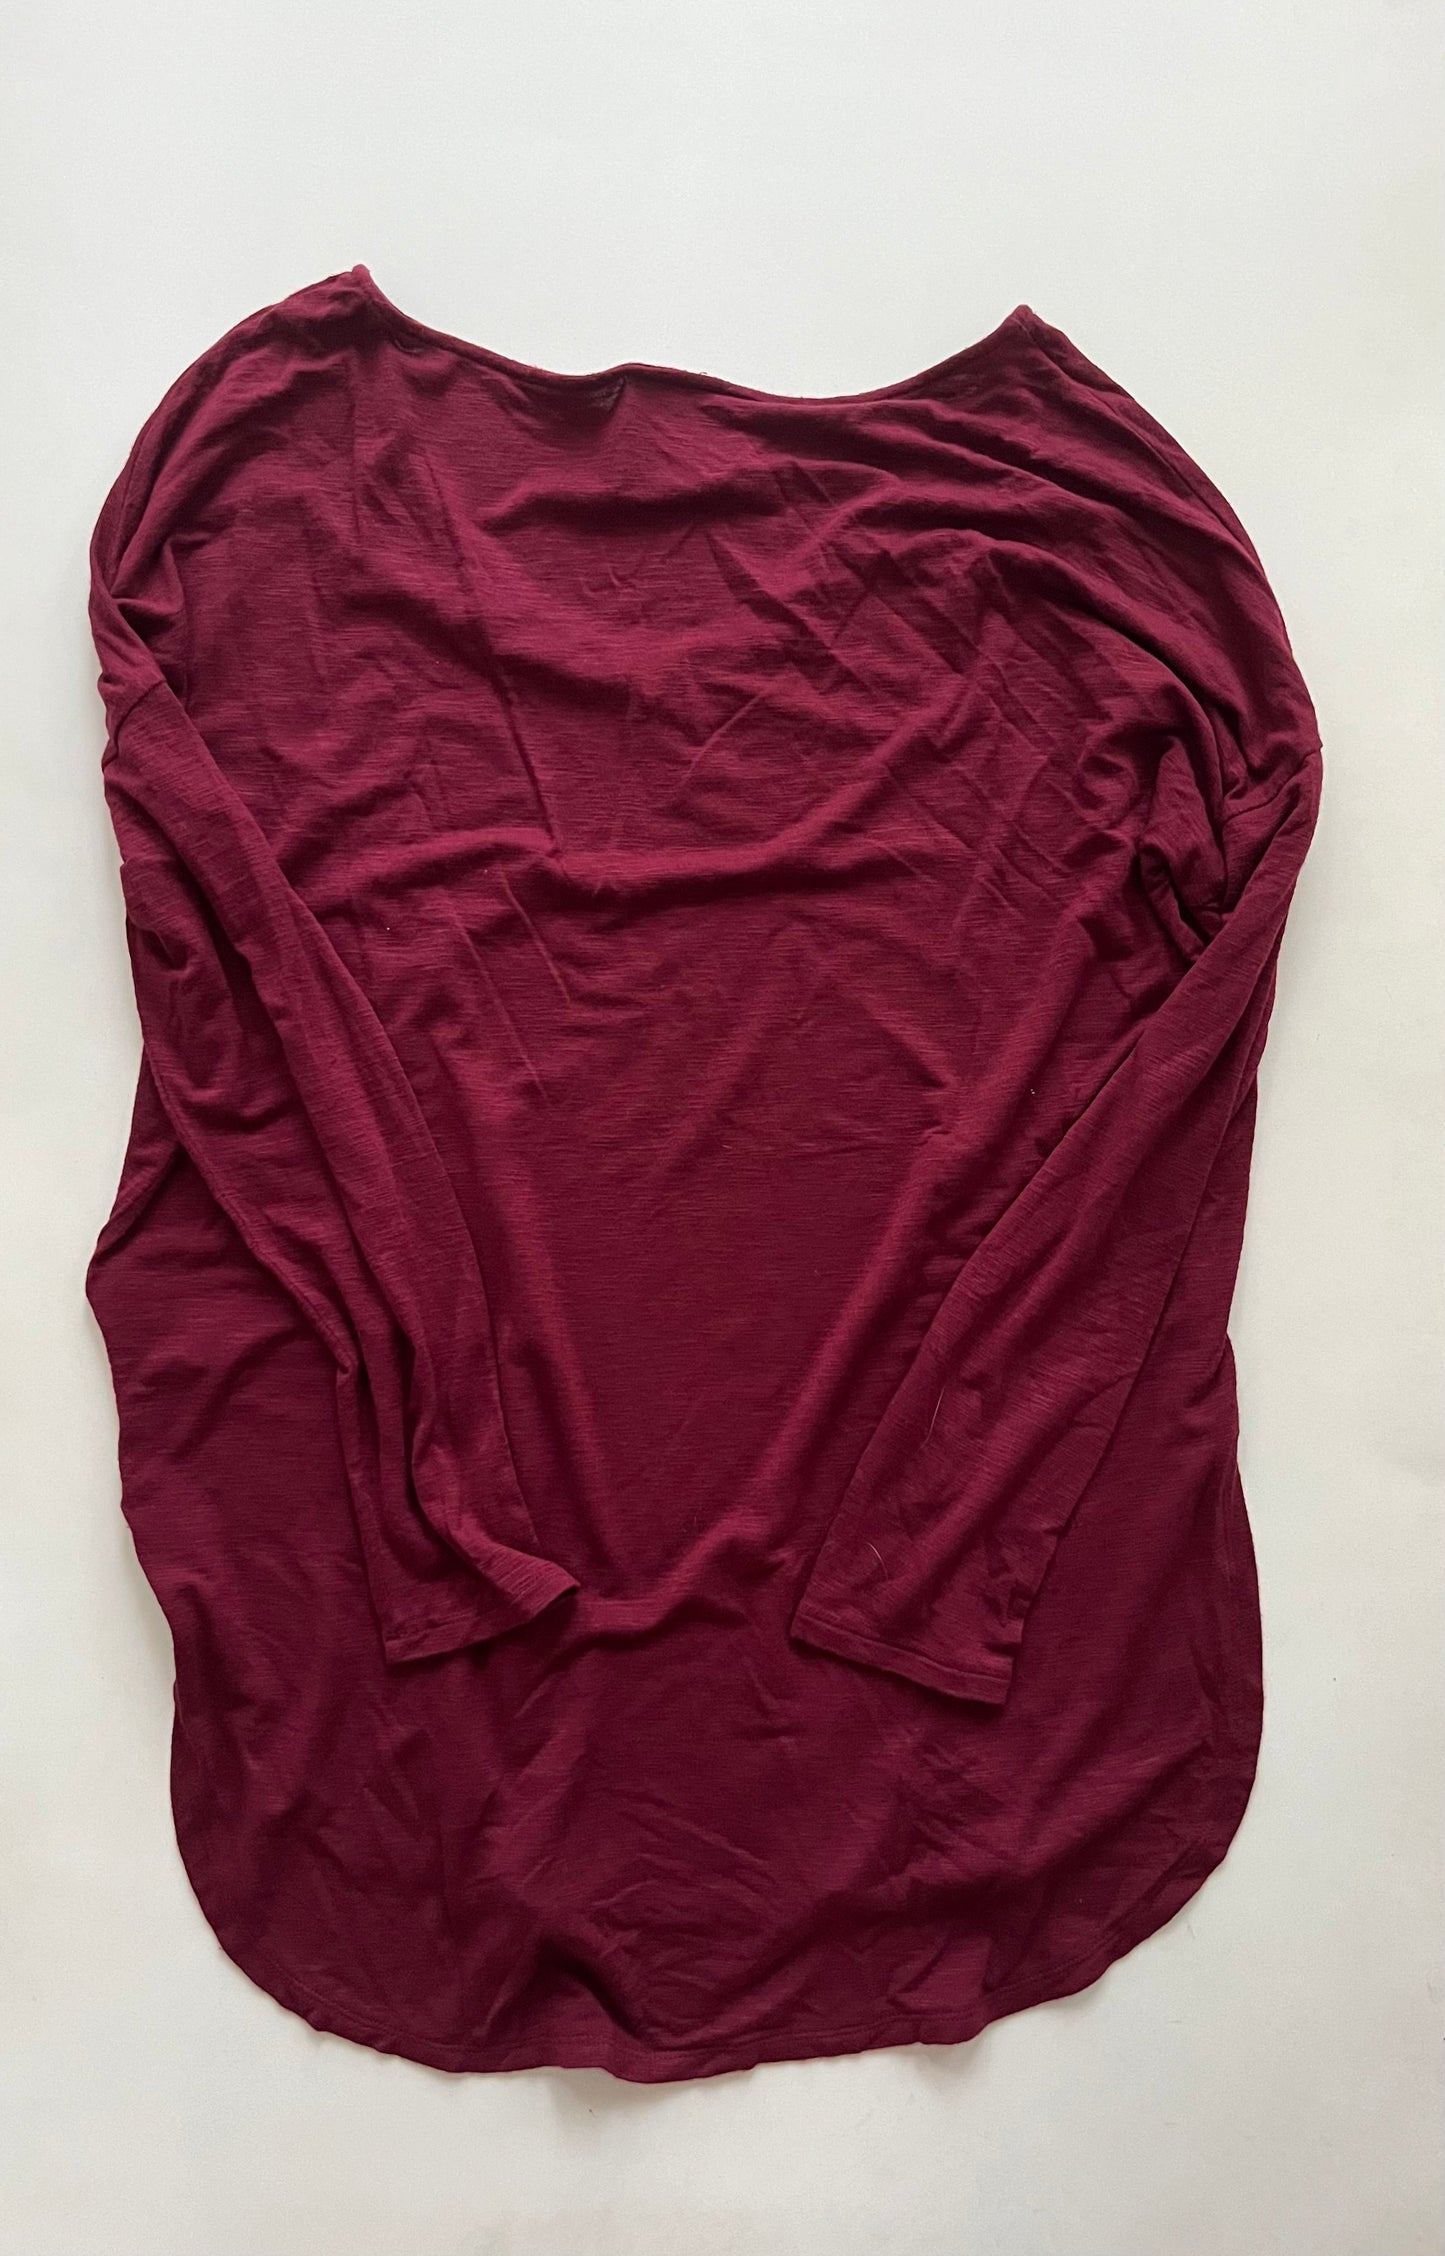 Maroon Top Long Sleeve Basic Old Navy, Size M